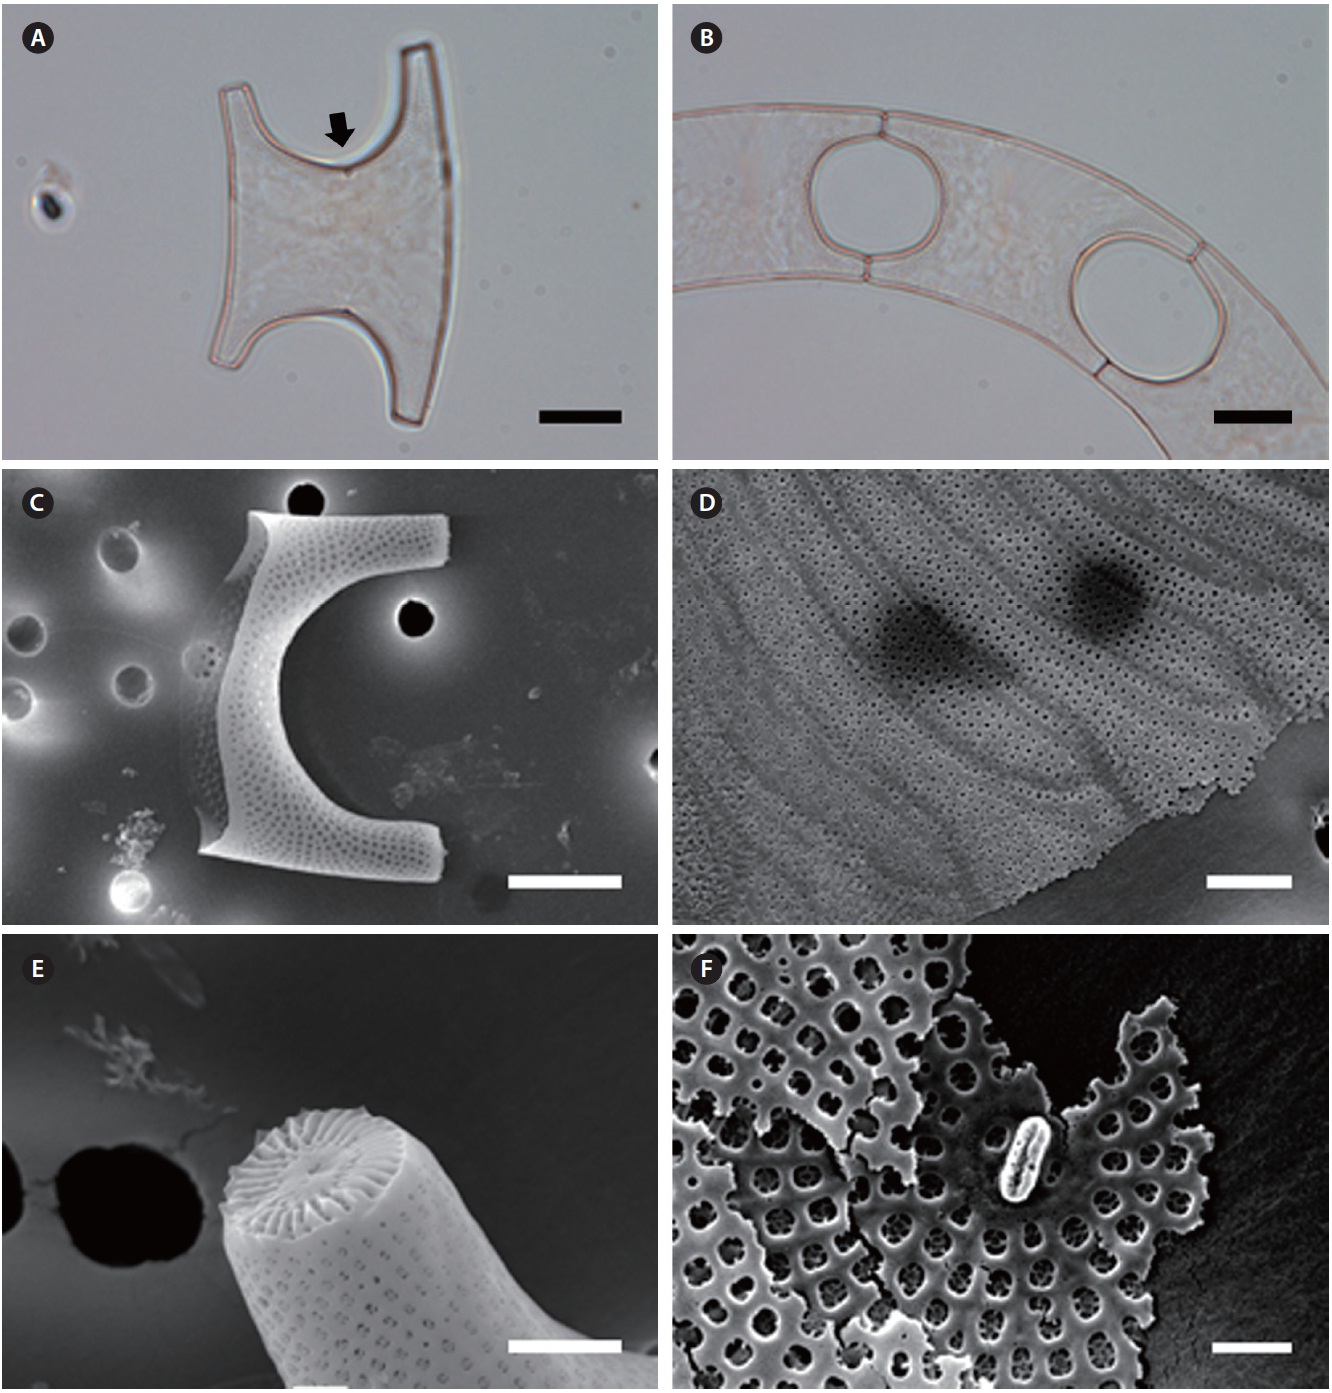 Eucampia zodiacus var. cornigera. (A) Solitary cell, labiate process on the valve center, light microscopy (LM). (B) Three-celled colony, rounded rhombic aperture shape, LM. (C) Long and broad conical elevations, scanning electron microscopy (SEM). (D) Intercalary bands with rows of puncta, SEM. (E) Ocellus with radial ribs, SEM. (F) Labiate process, SEM. Scale bars represent: A & B, 10 μm; C, 5 μm; D & E, 2 μm; F, 1 μm.